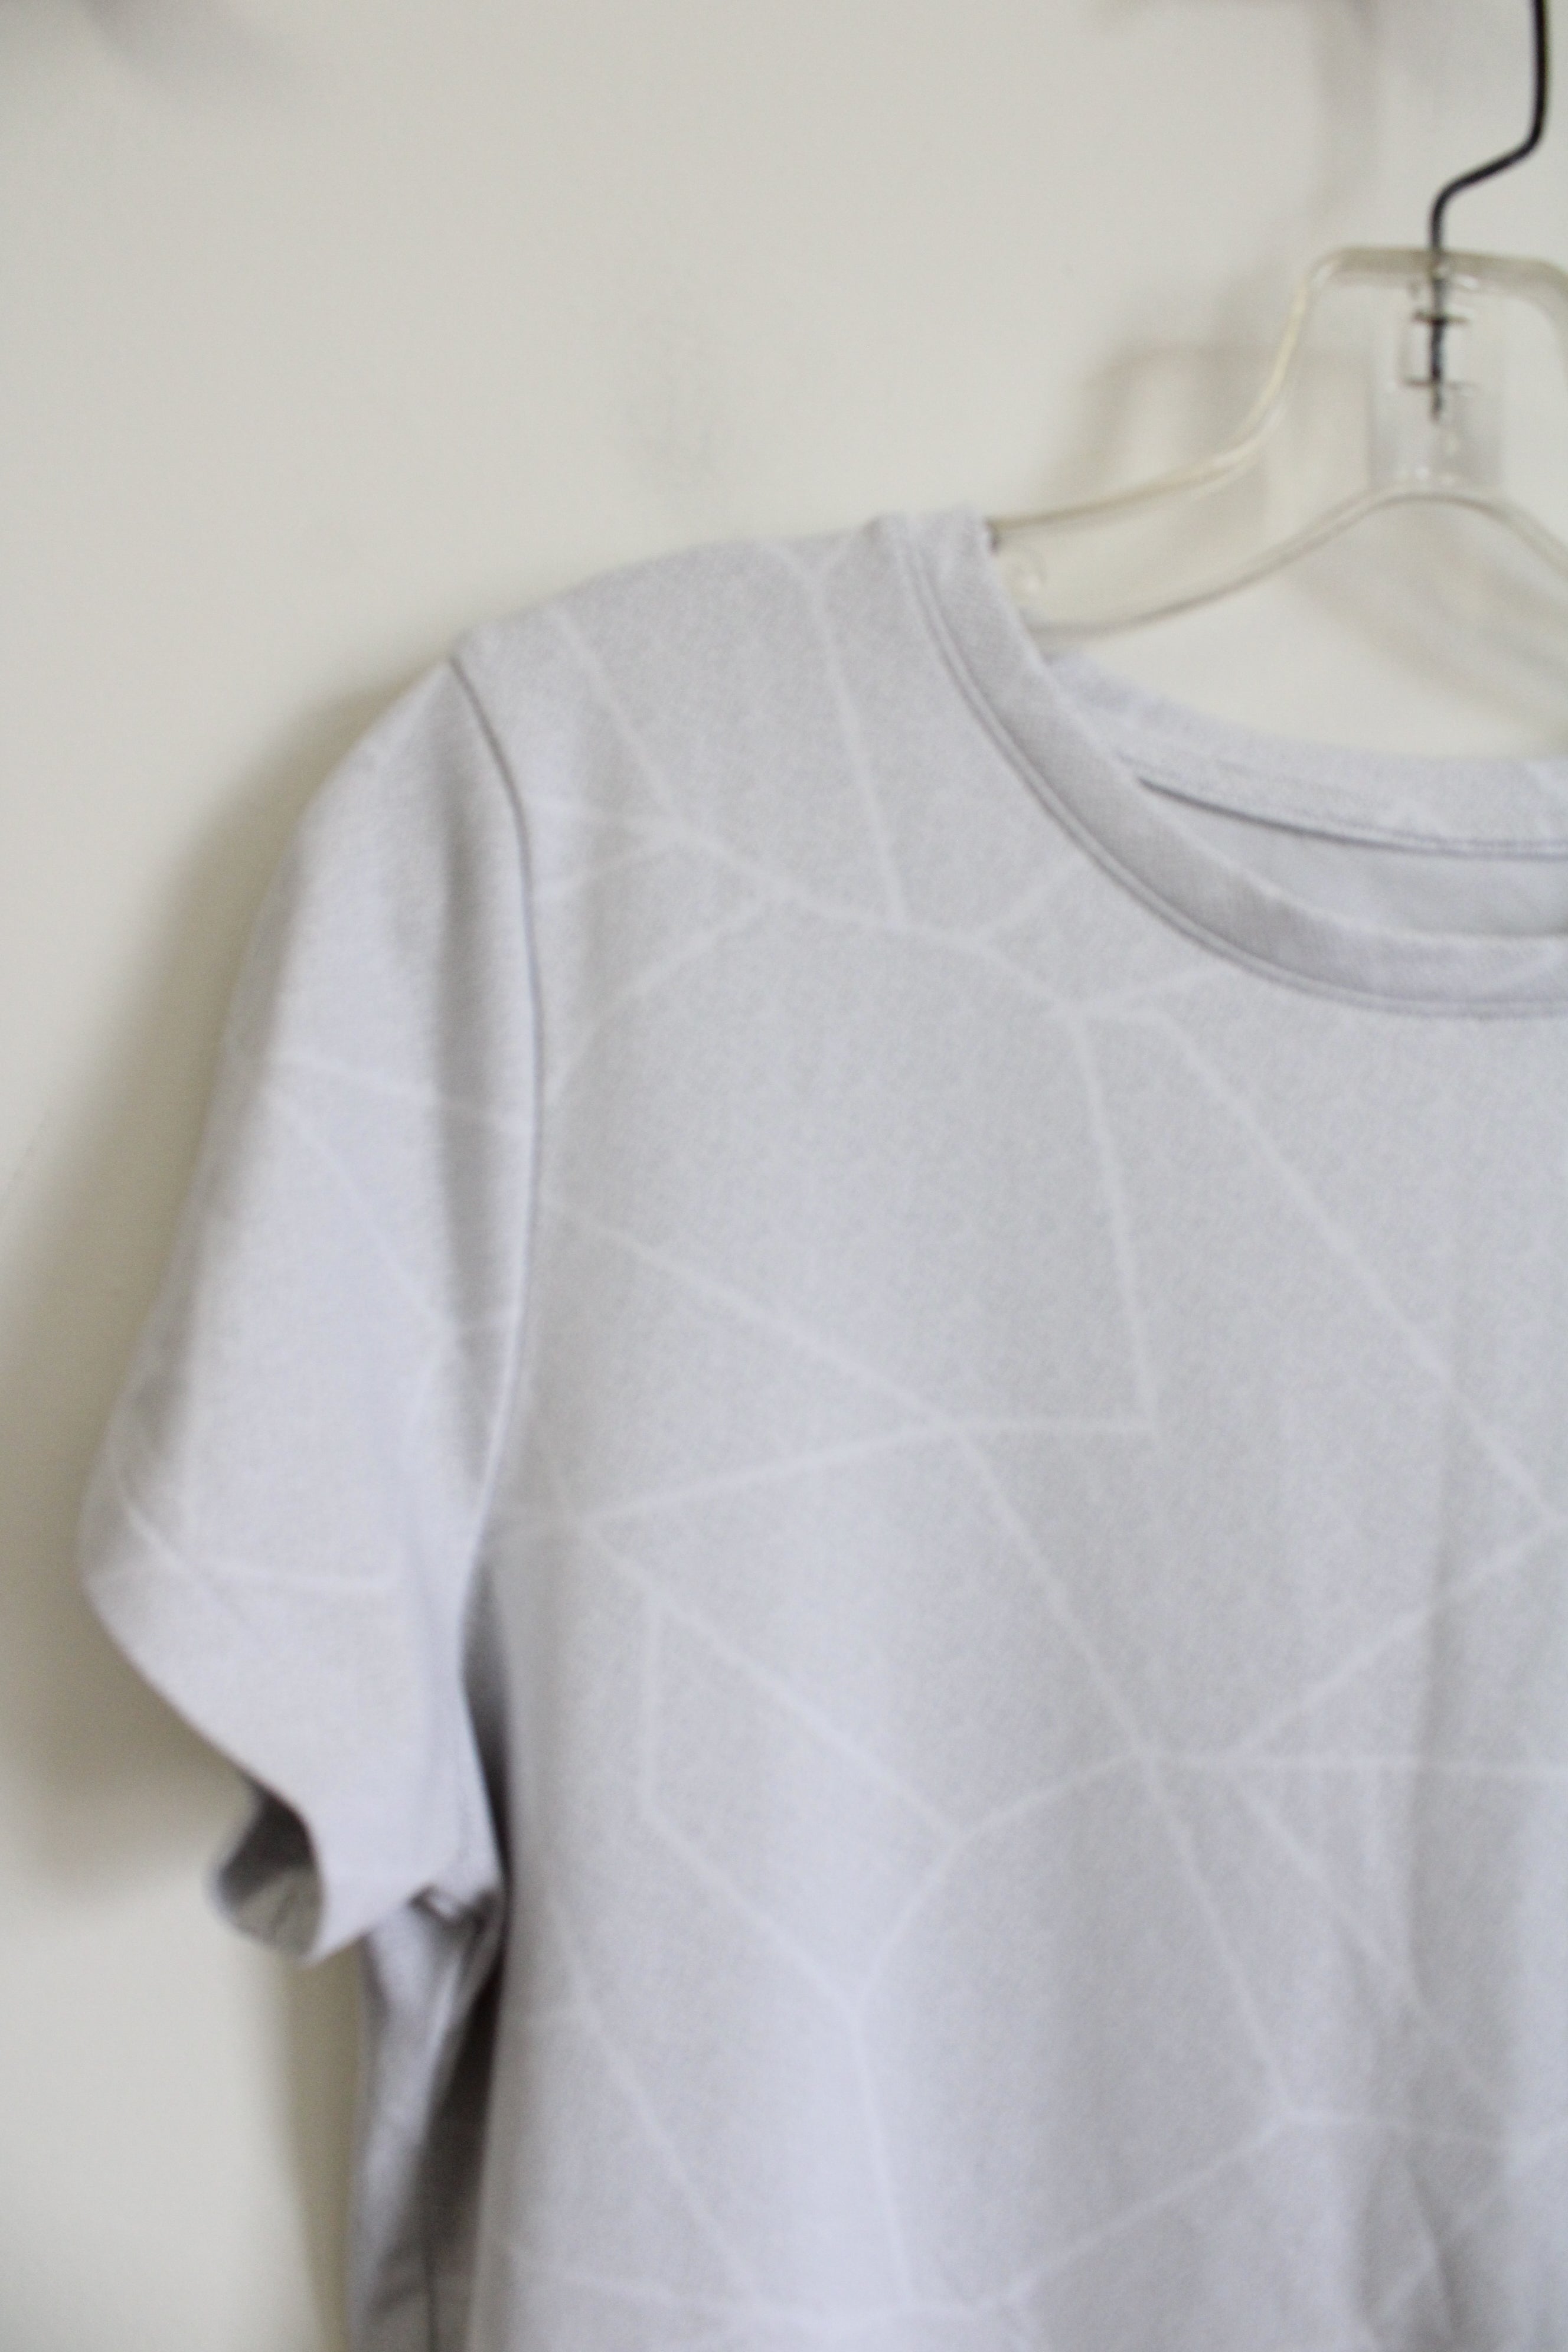 Under Armour Gray White Patterned Top | L